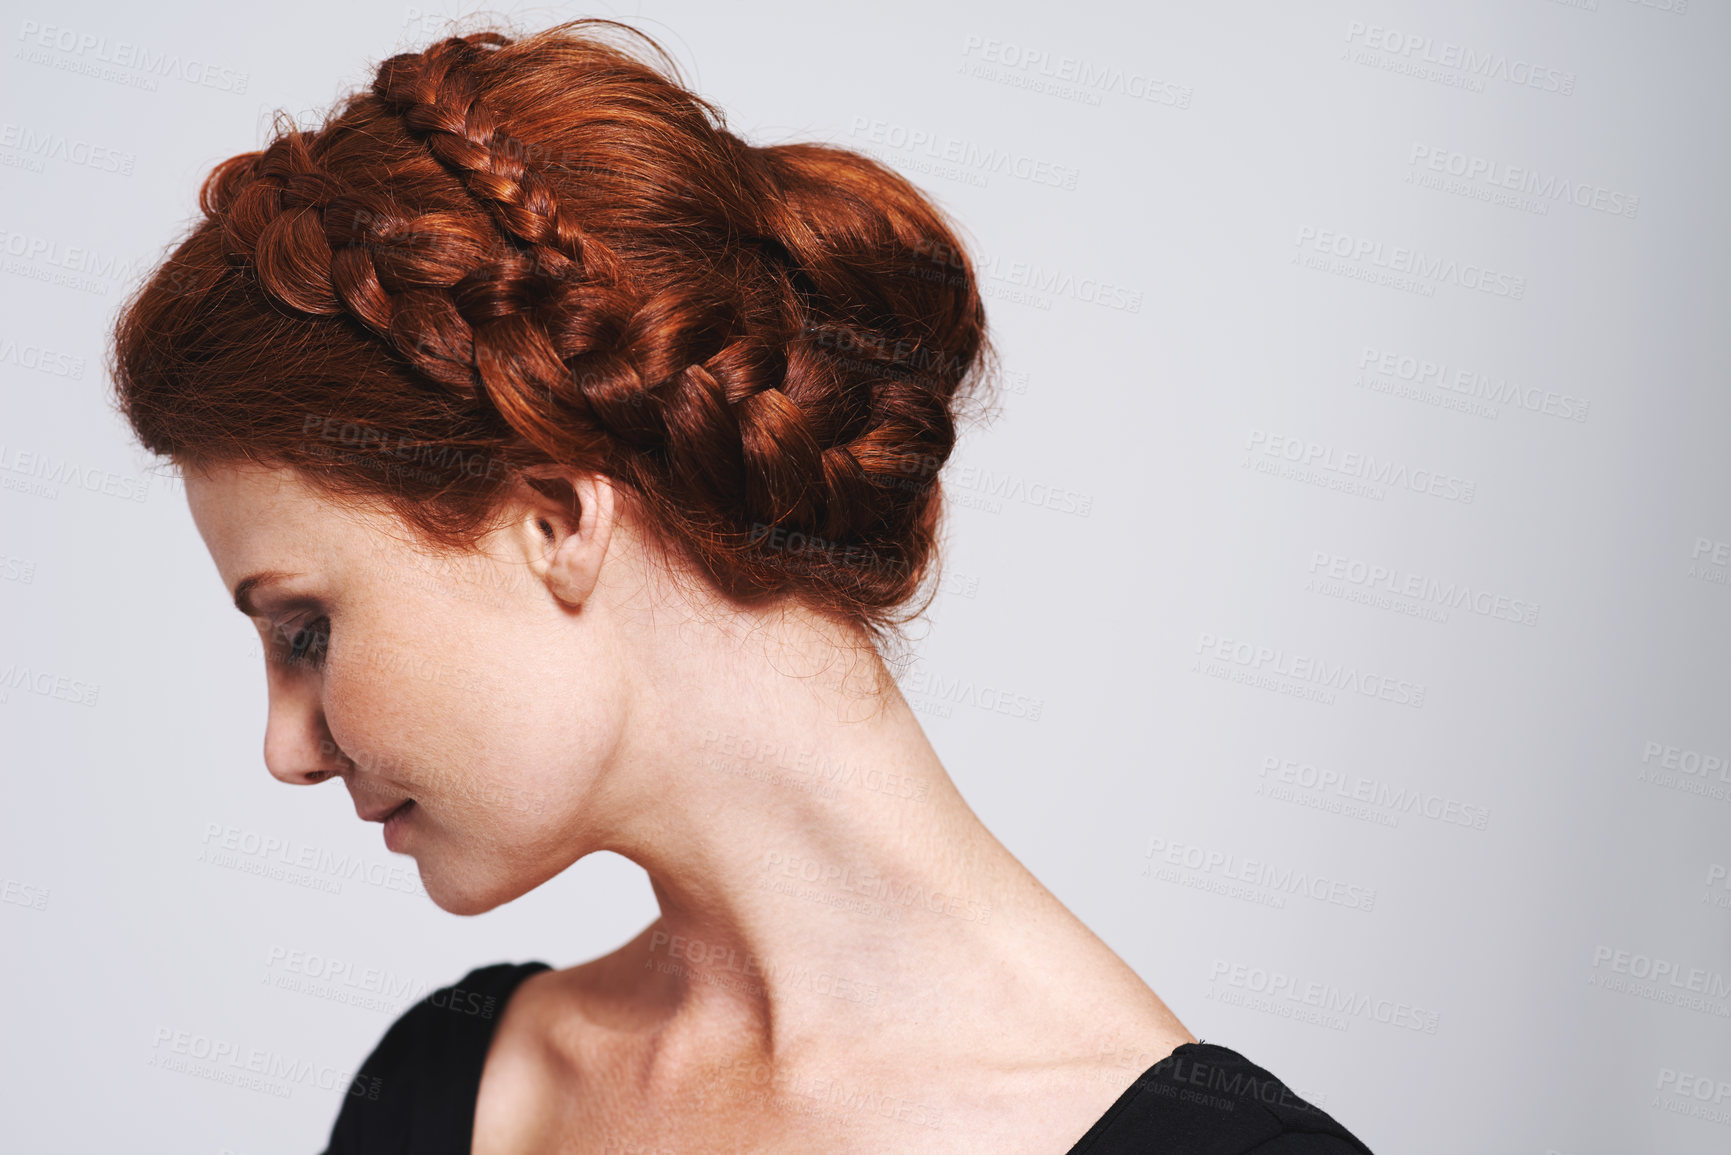 Buy stock photo Studio shot of a beautiful redhead woman with a braided up-do posing against a gray background